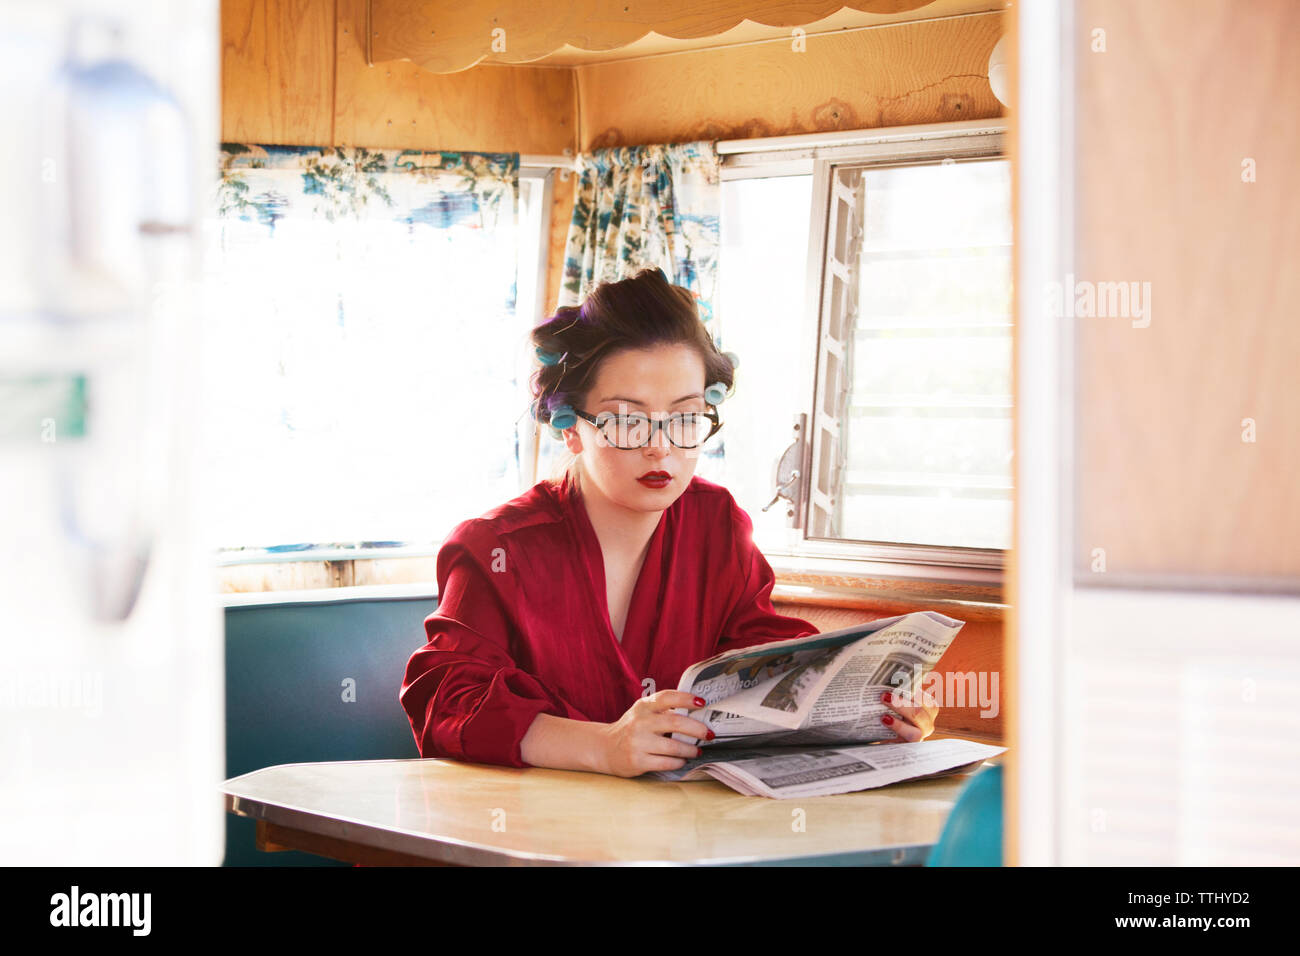 Woman reading newspaper while sitting by table in camper van Stock Photo